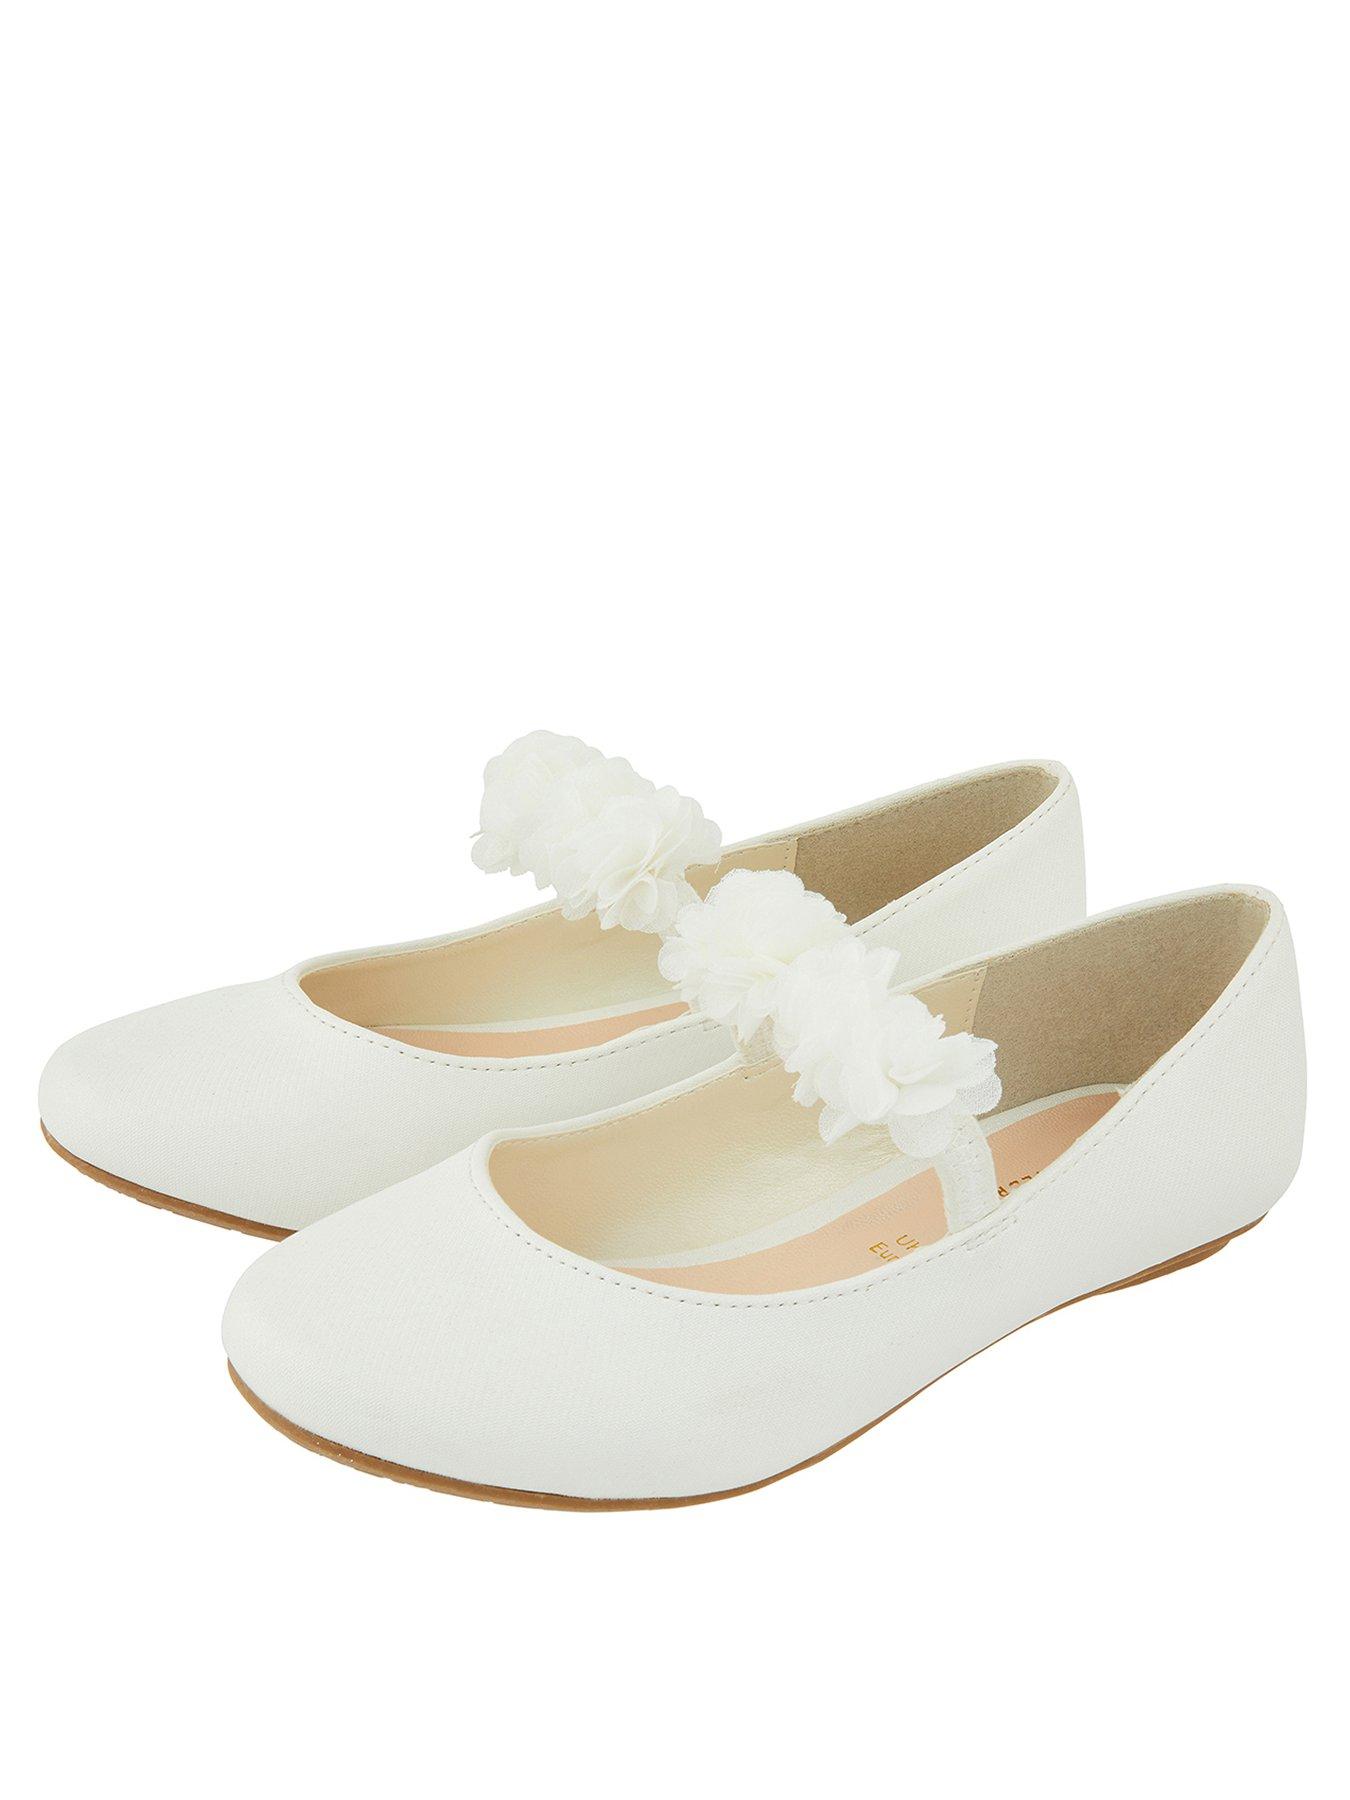 ivory childrens shoes